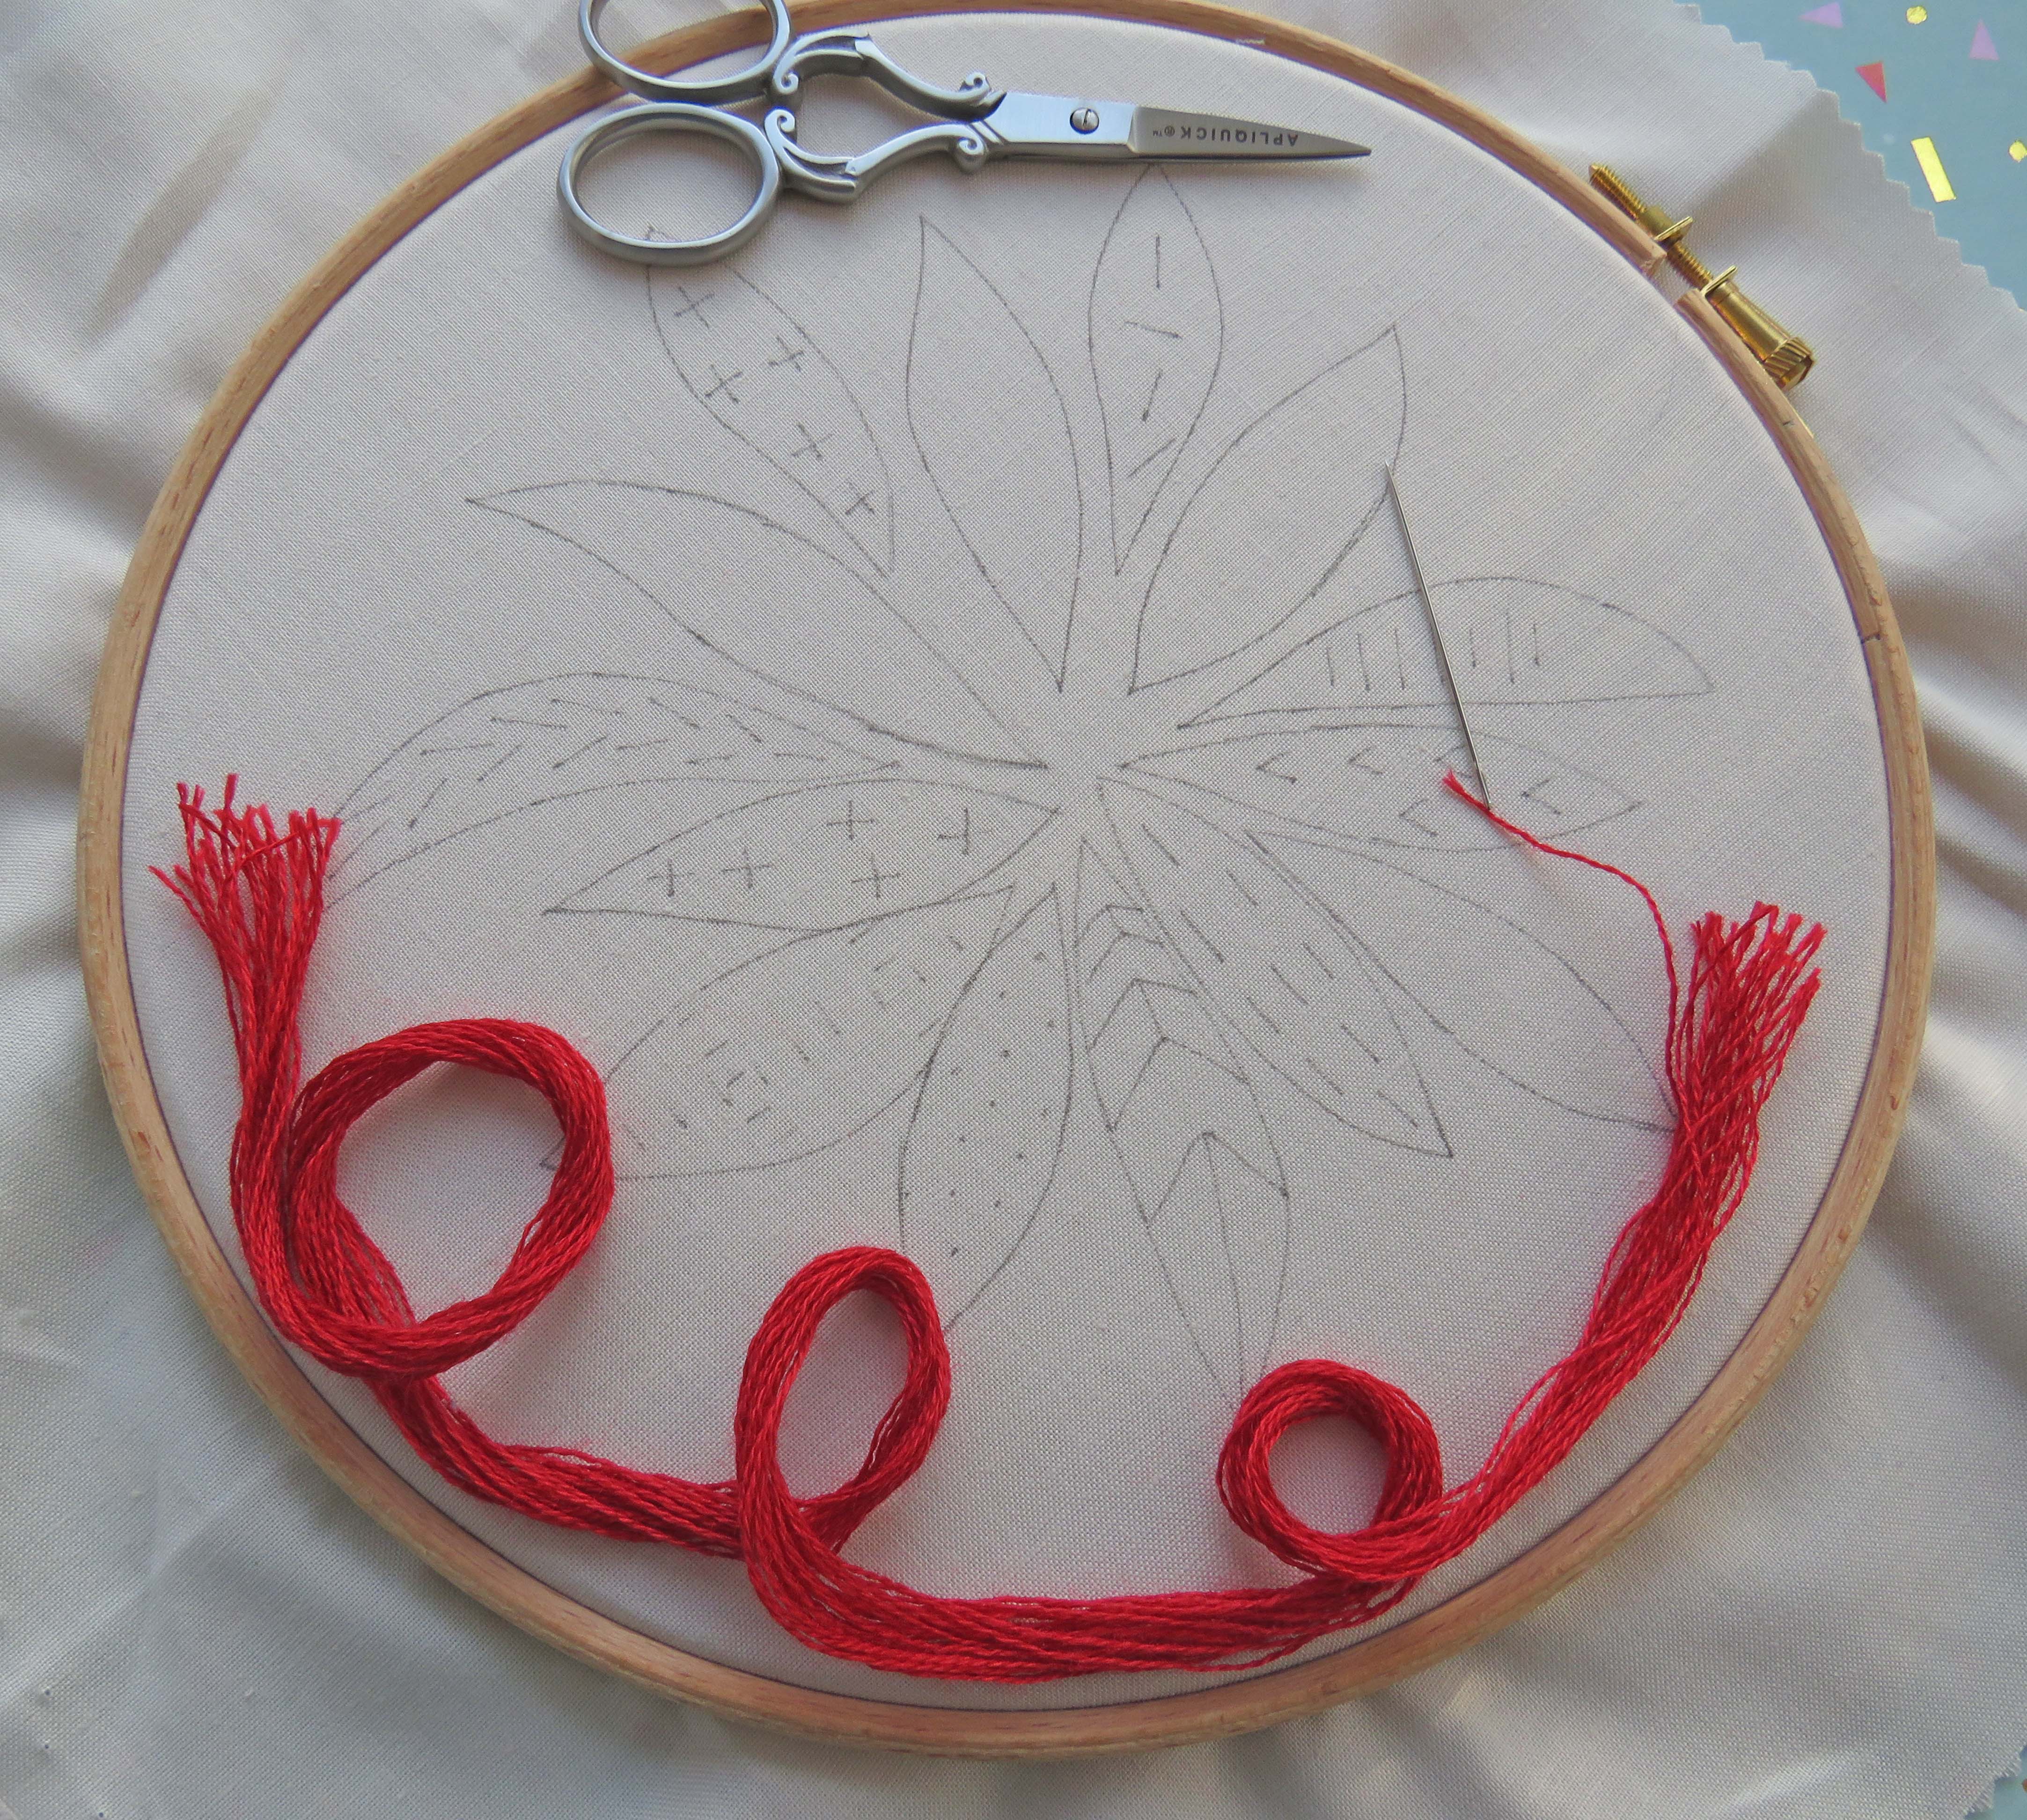 poinsettia hand embroidery pattern by stitchdoodles